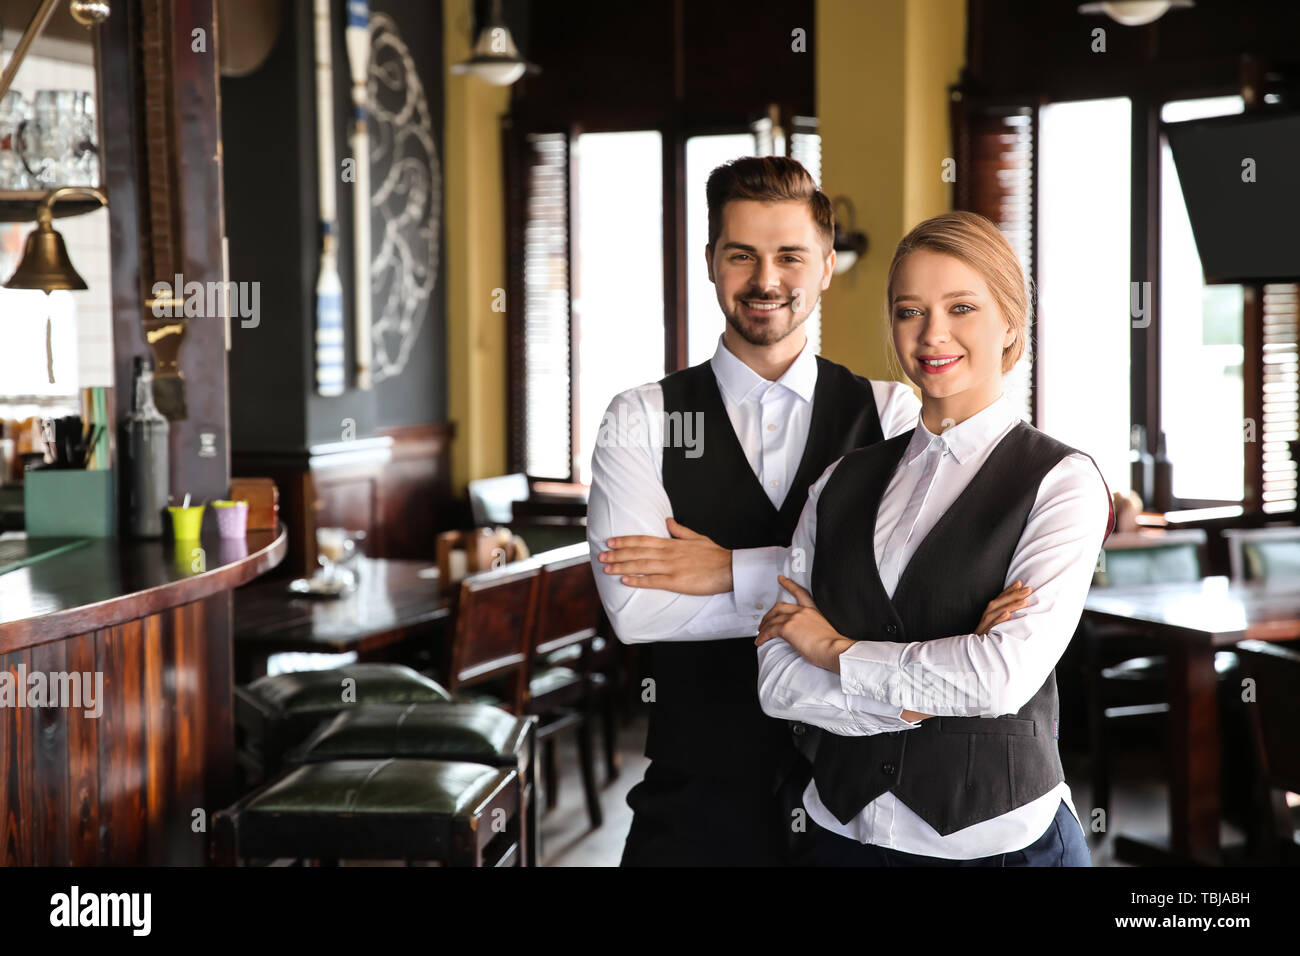 Young waiters in restaurant Stock Photo